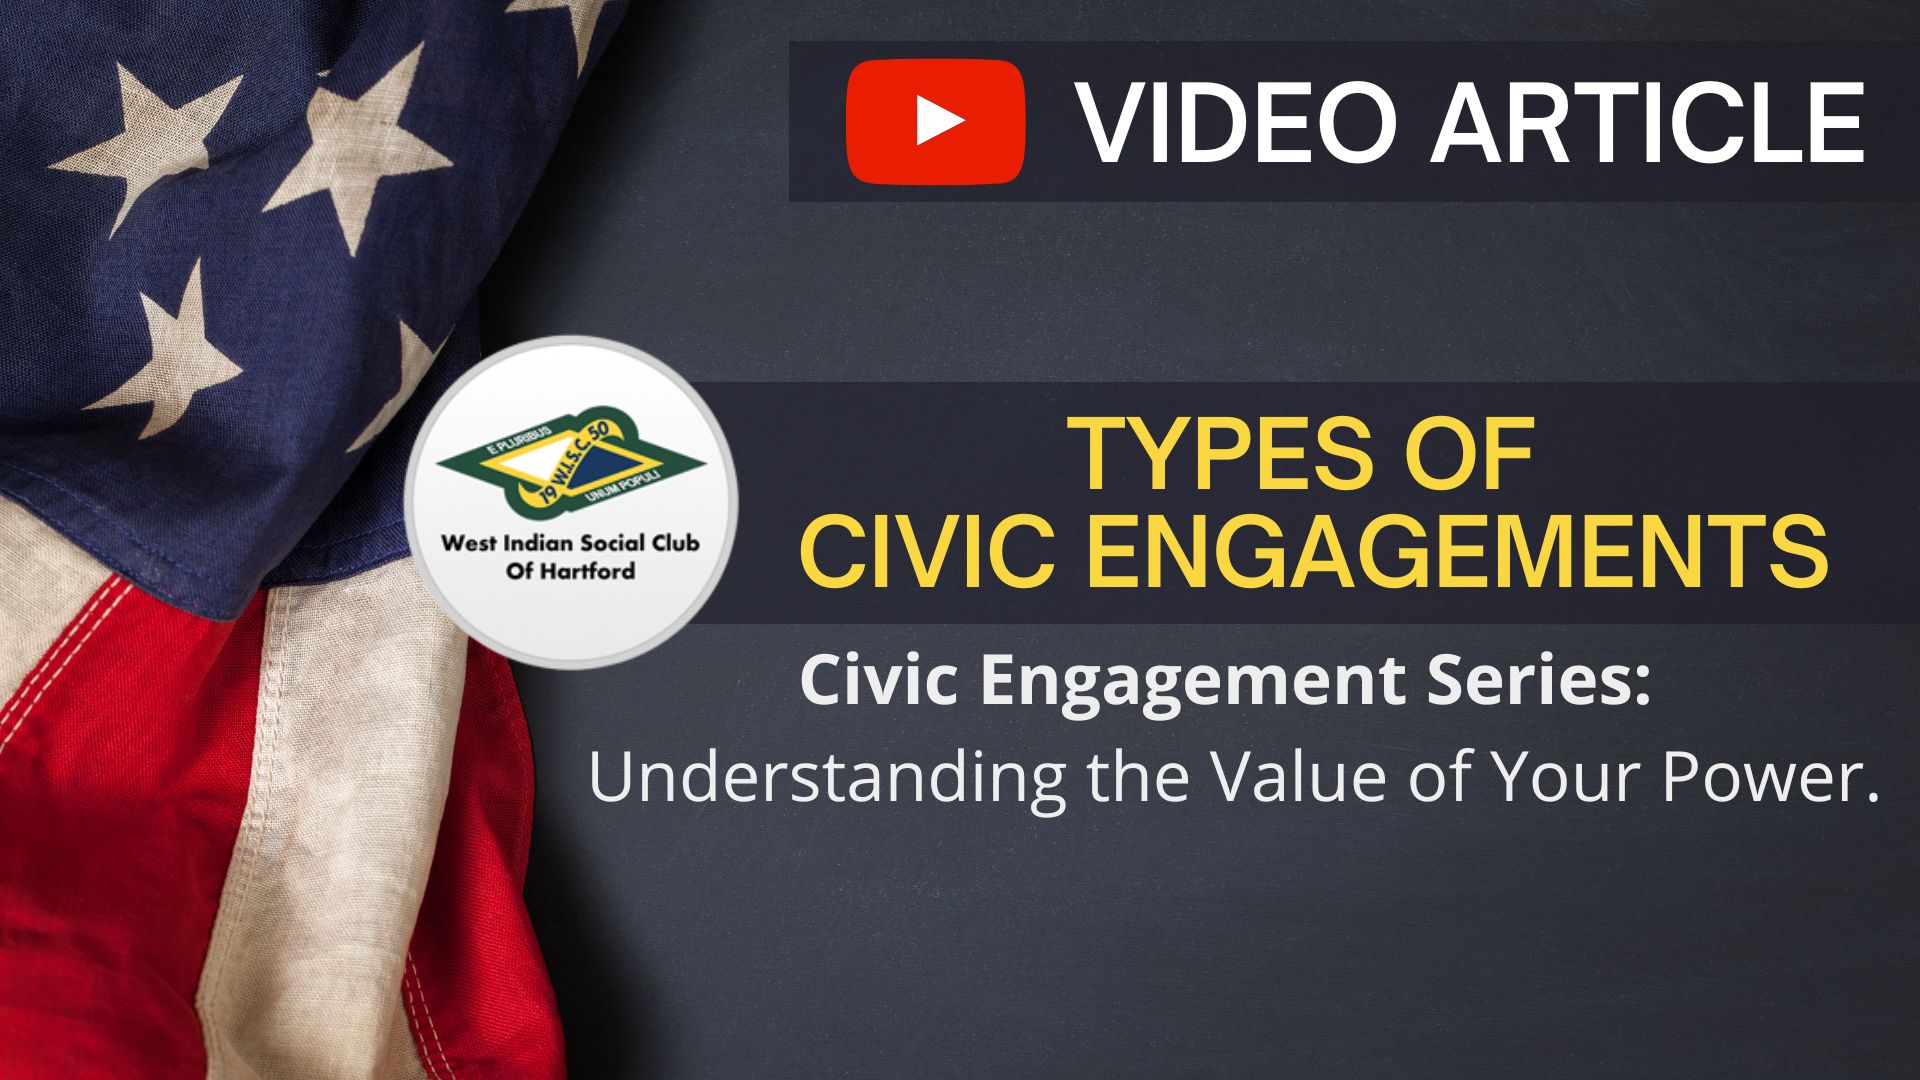 Video Article Cover - Civic Engagements Series - Types of Civic Engagements